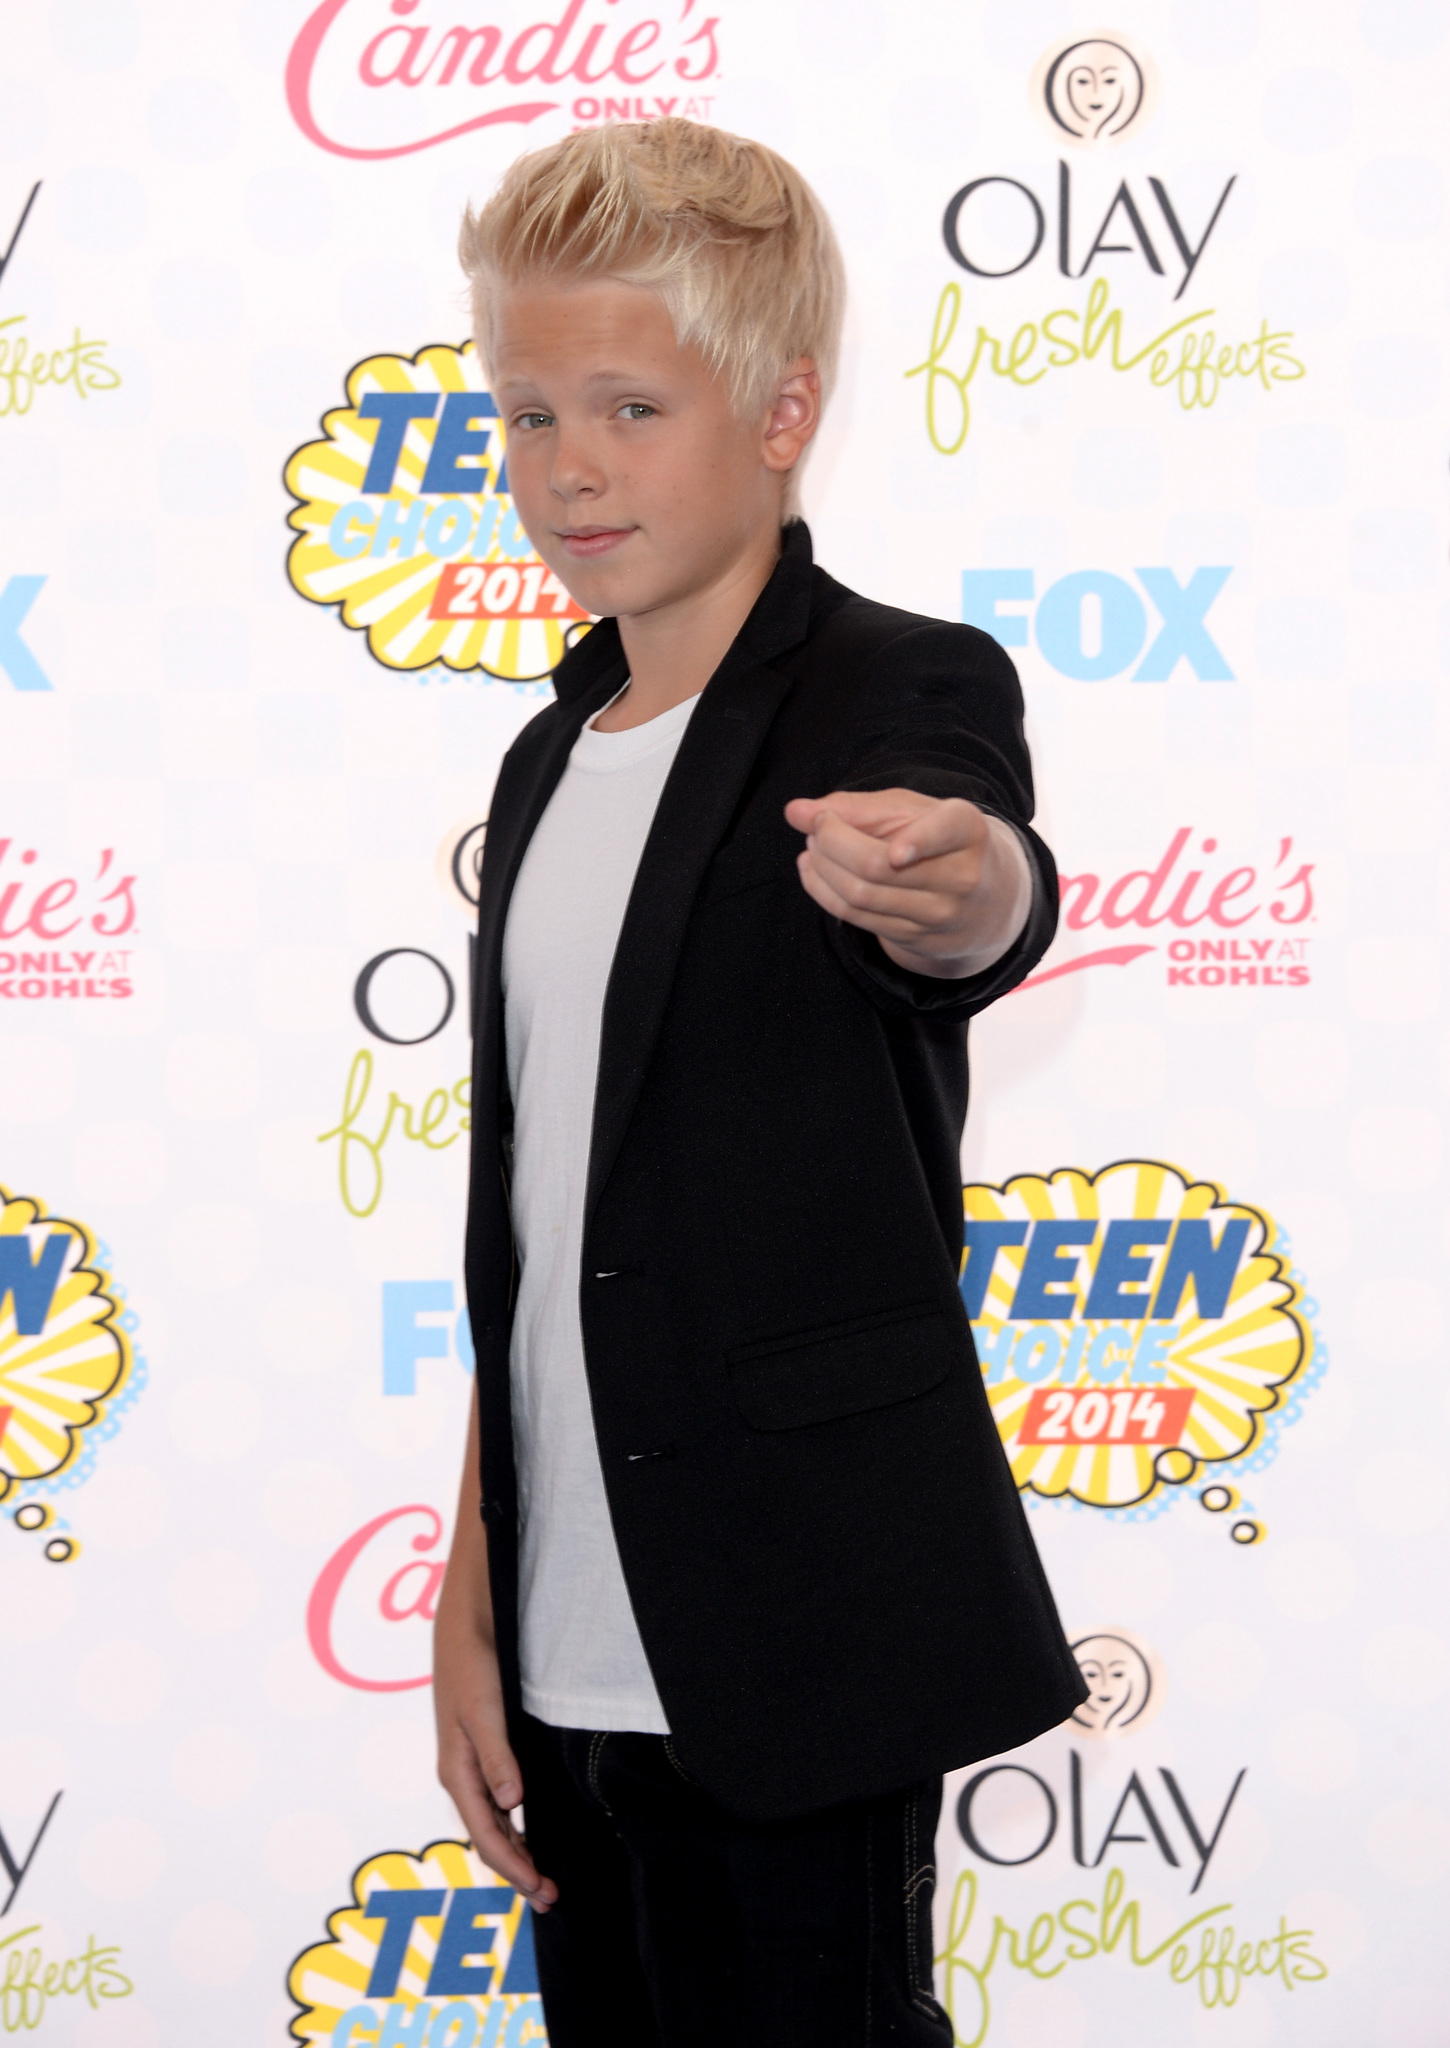 Carson Lueders at event of Teen Choice Awards 2014 (2014)